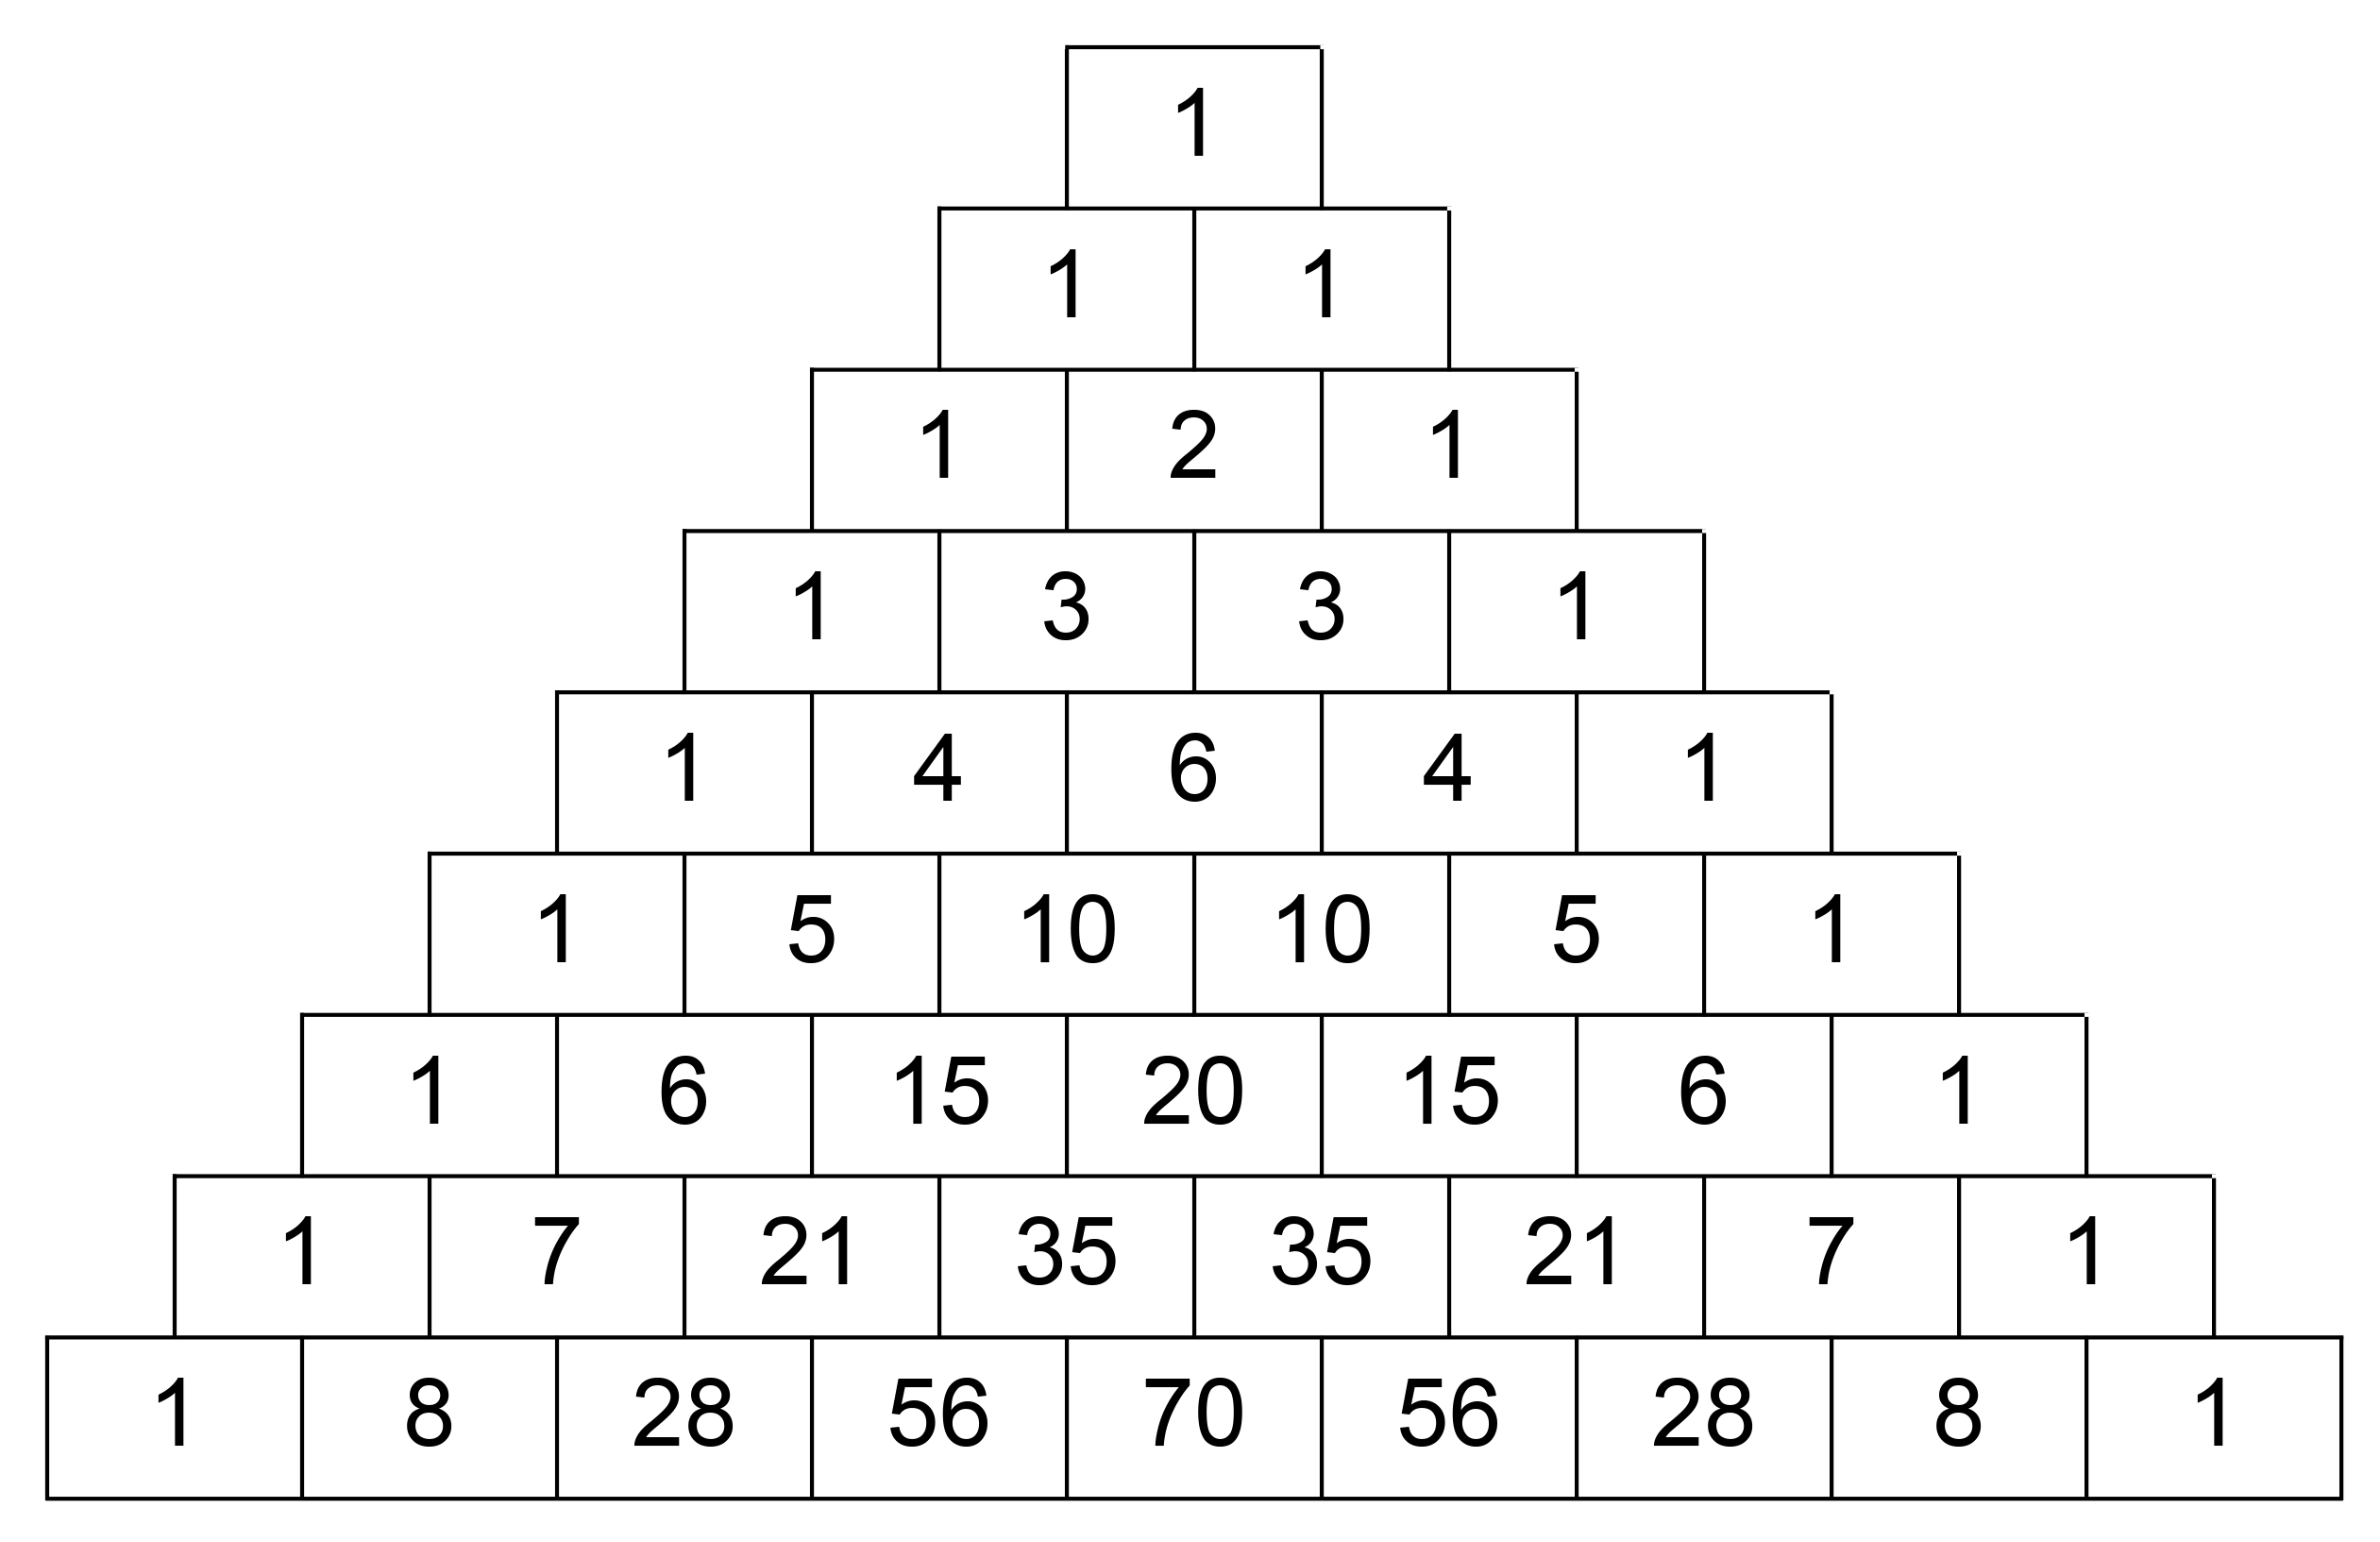 The top three boxes have the number 1. The numbers in the boxes in the third row from the top are 1, 2, 1, in that order. The fourth row is 1, 3, 3, 1. The fifth row is 1, 4, 6, 4, 1. The sixth row is 1, 5 ,10 ,10, 5, 1. The seventh row is 1, 6, 15, 20, 15, 6 ,1. The eighth row is 1, 7, 21, 35, 35, 21, 7, 1, and the ninth row is 1, 8, 28, 56, 70, 56, 28, 8, 1.